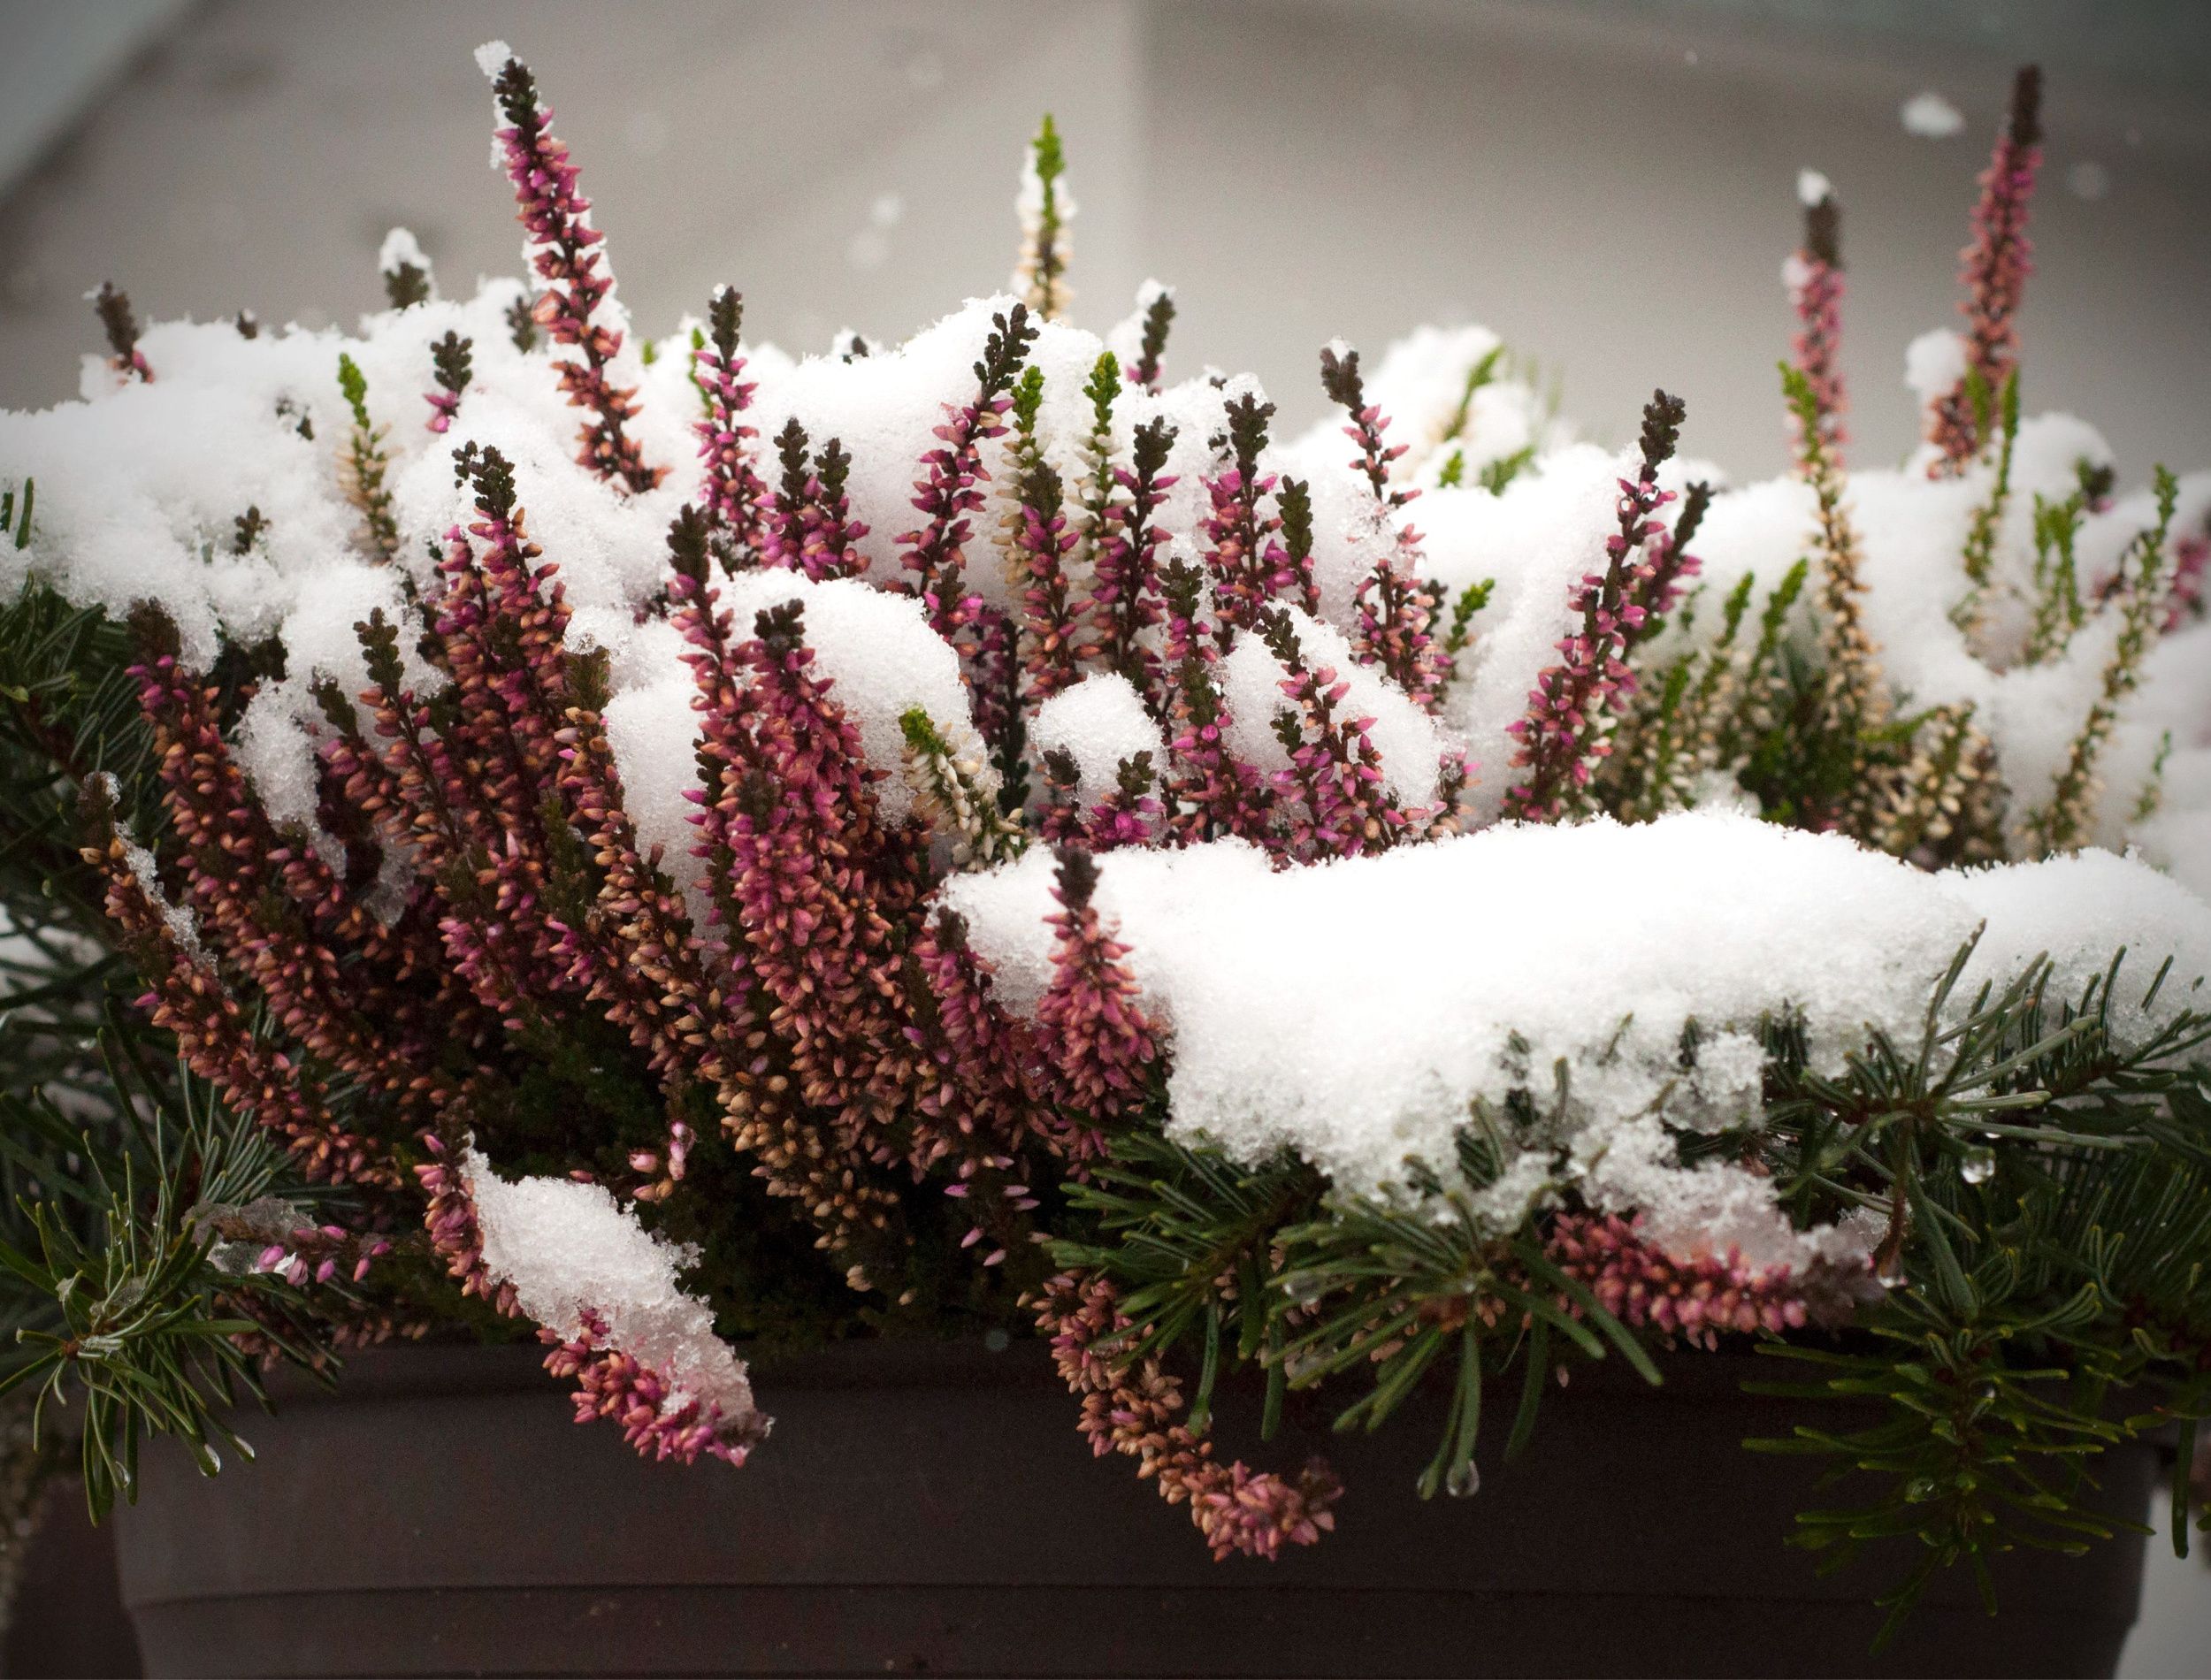 Pink heather flower growing in plastic pot, outdoors on terrace in winter, covered with white frost